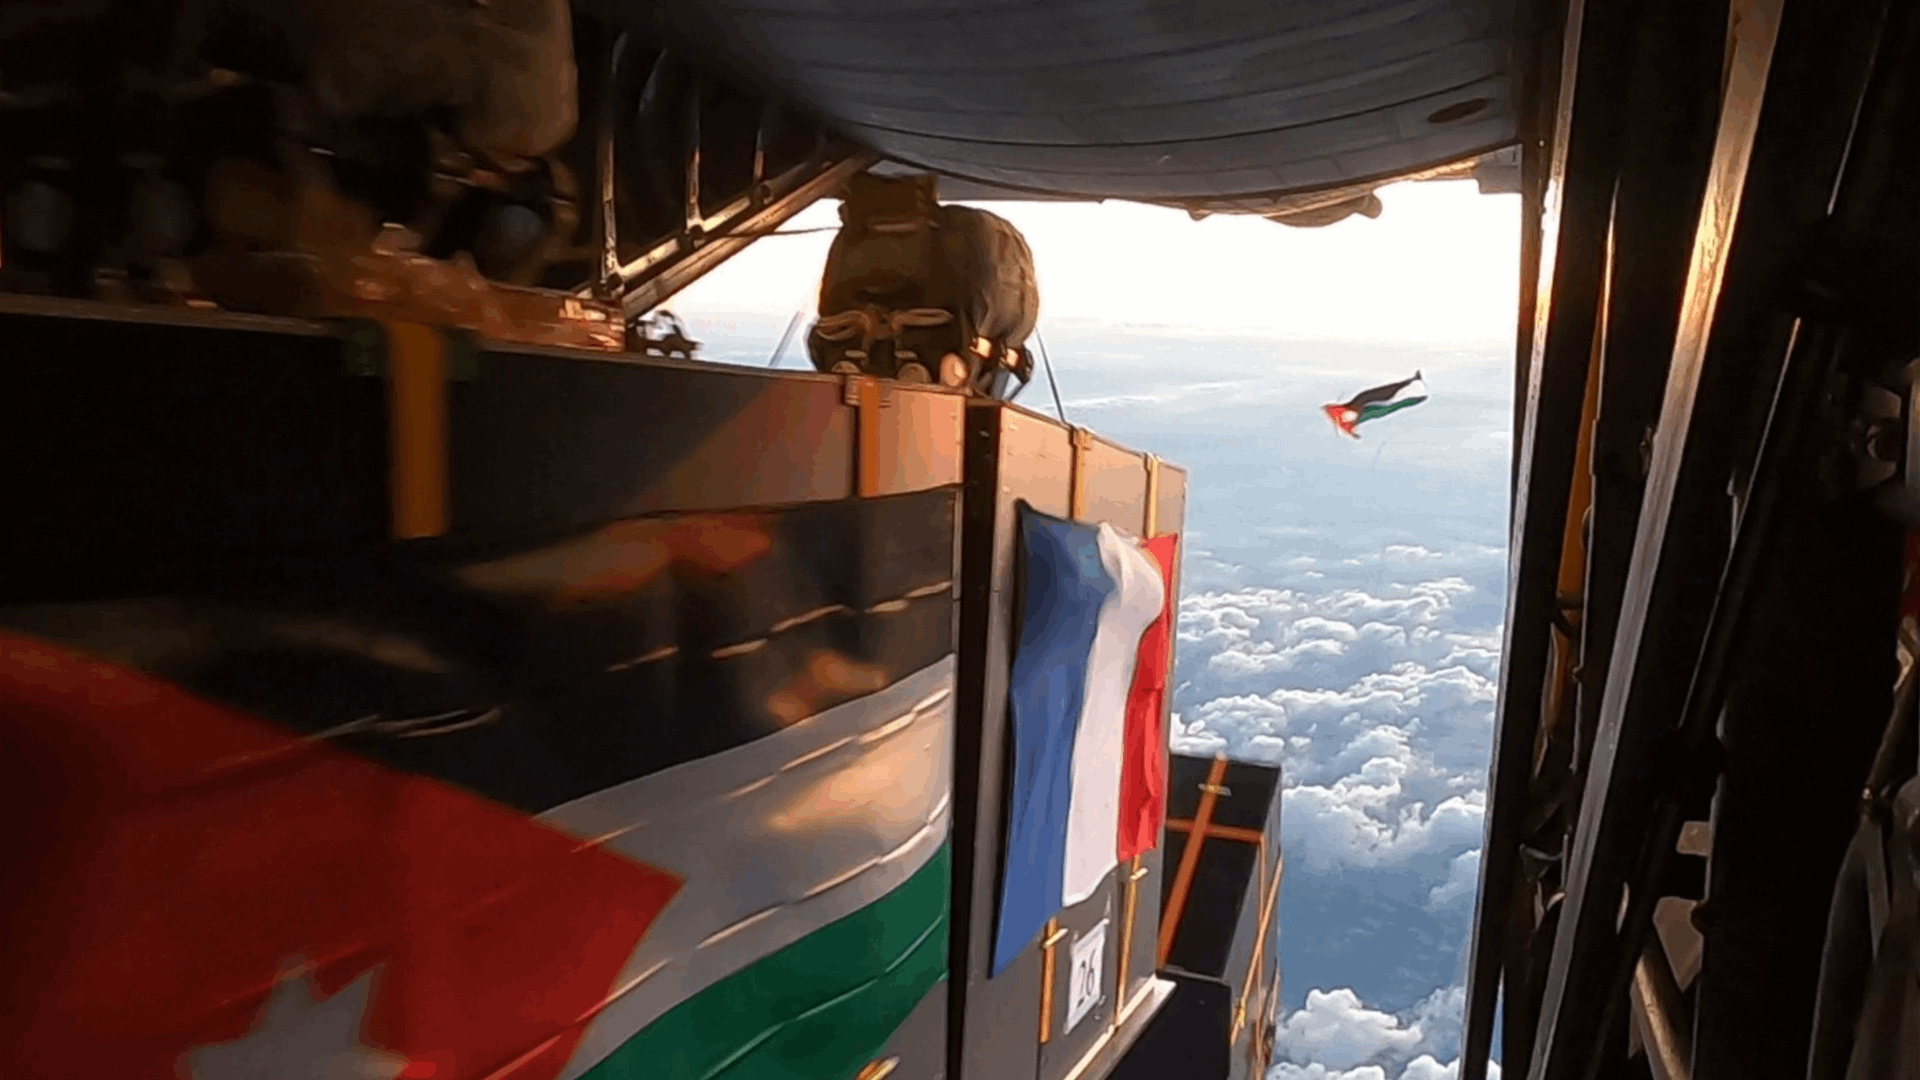 Jordan airdrops aid into Gaza with four planes, one of which belongs to the French army